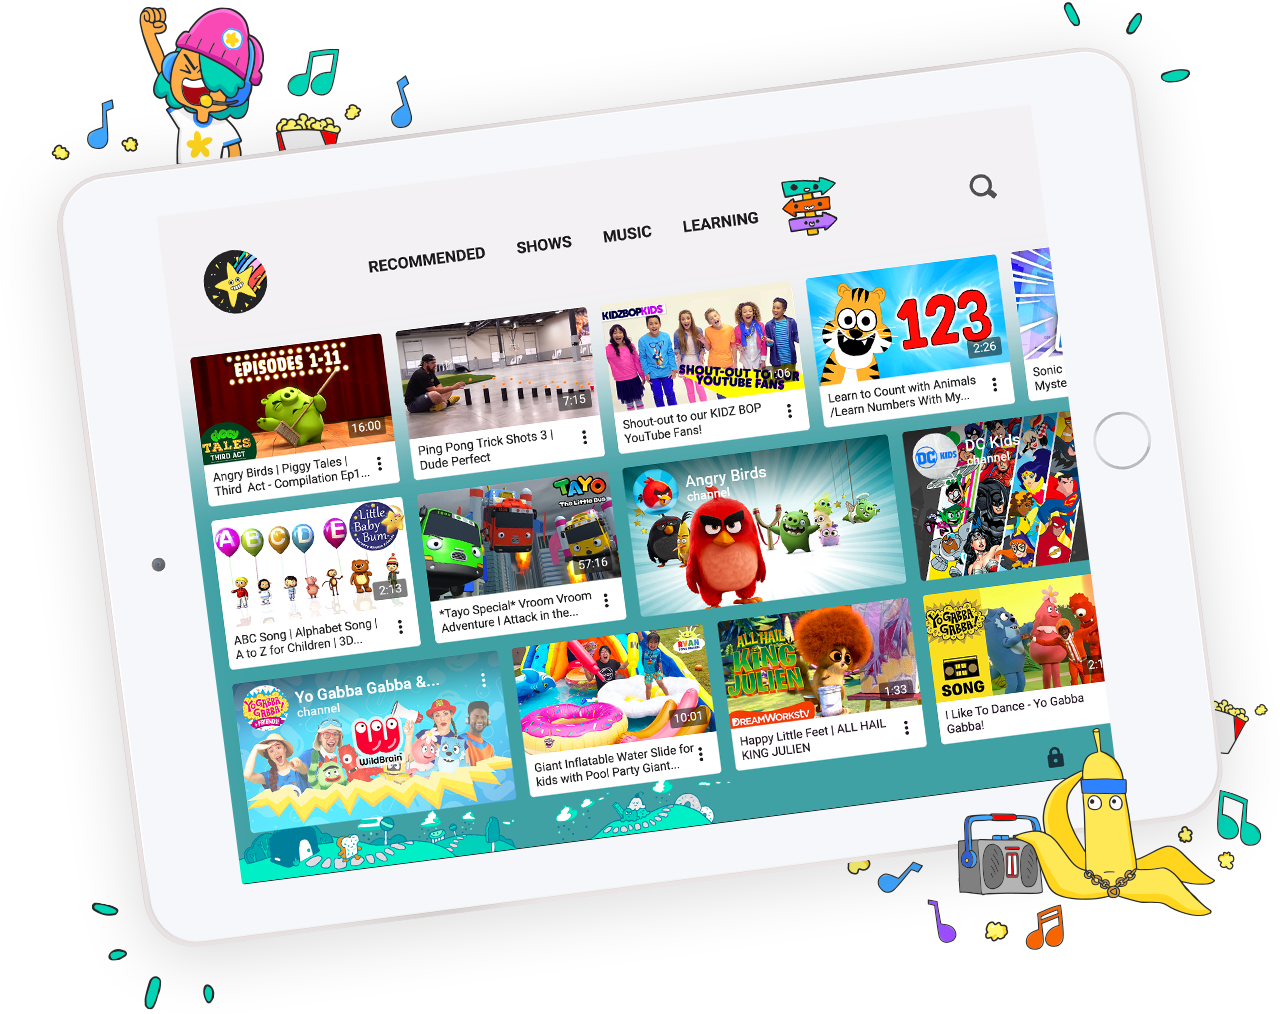 Kids get an exciting new YouTube with a cool new look and their own profiles